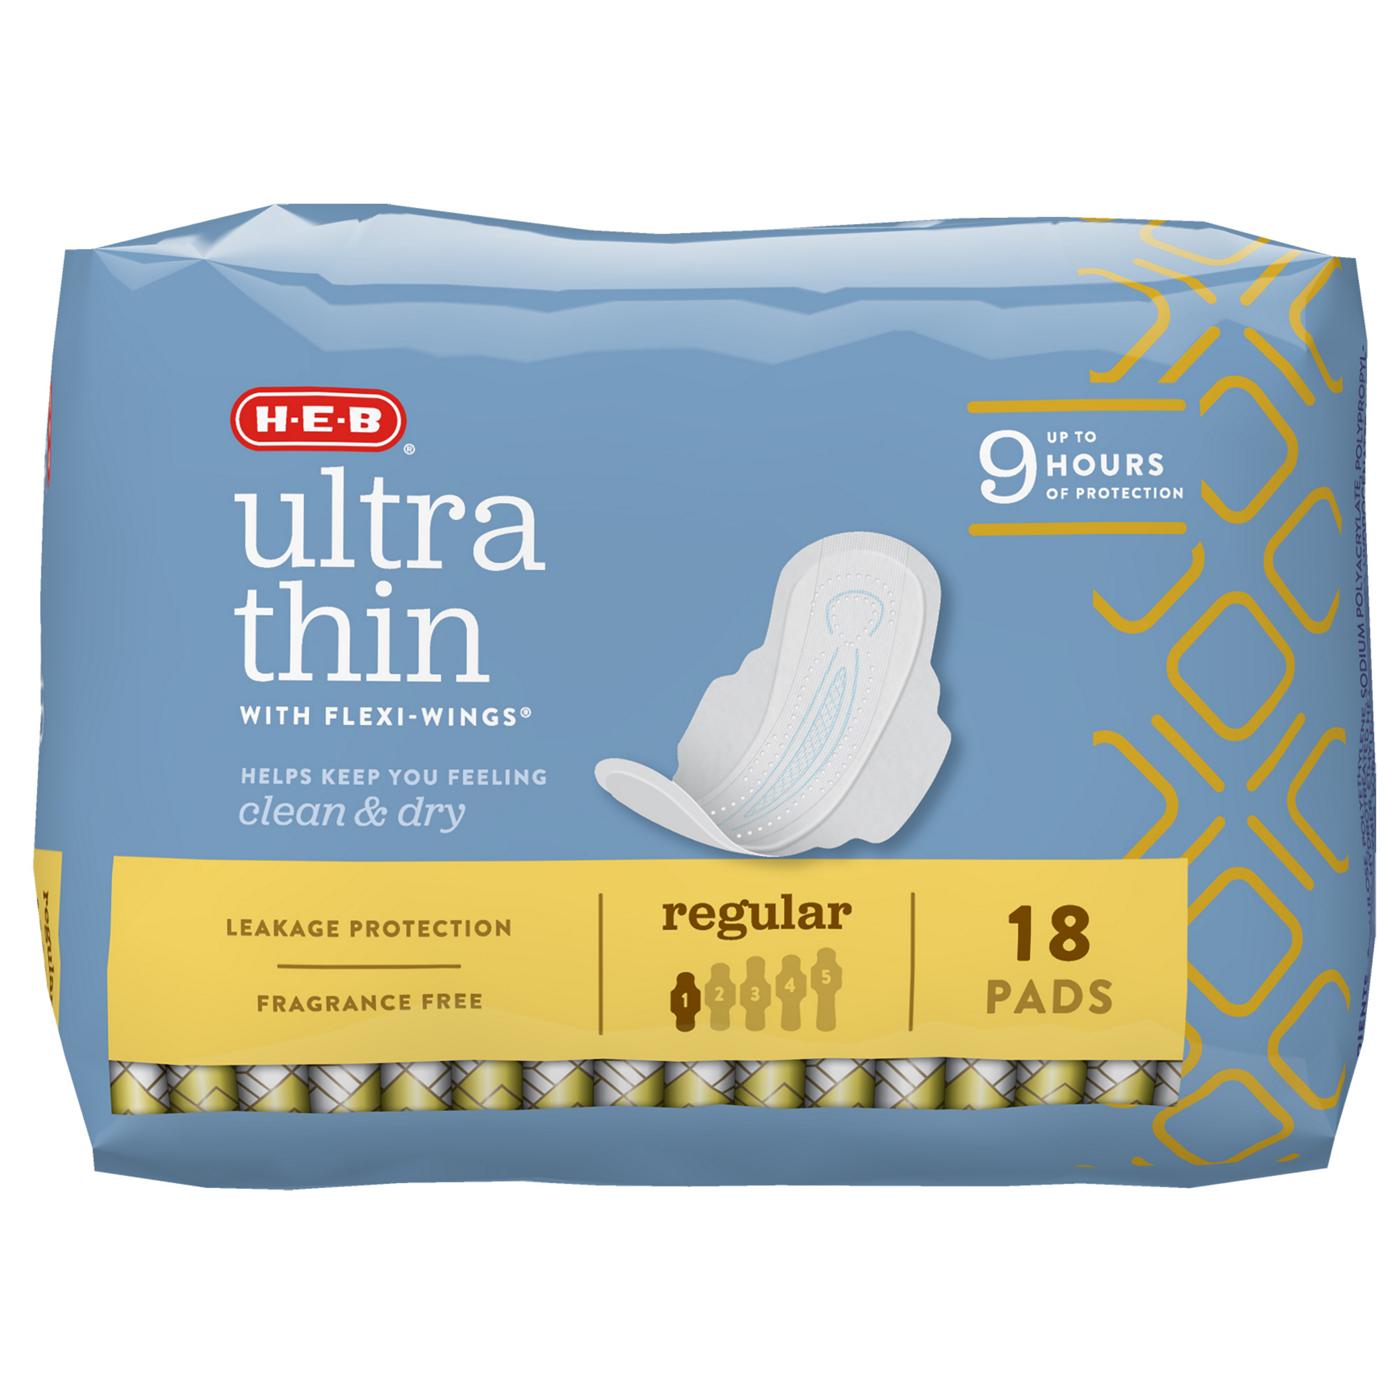 H-E-B Ultra Thin with Flexi-Wings Pads - Regular; image 1 of 5